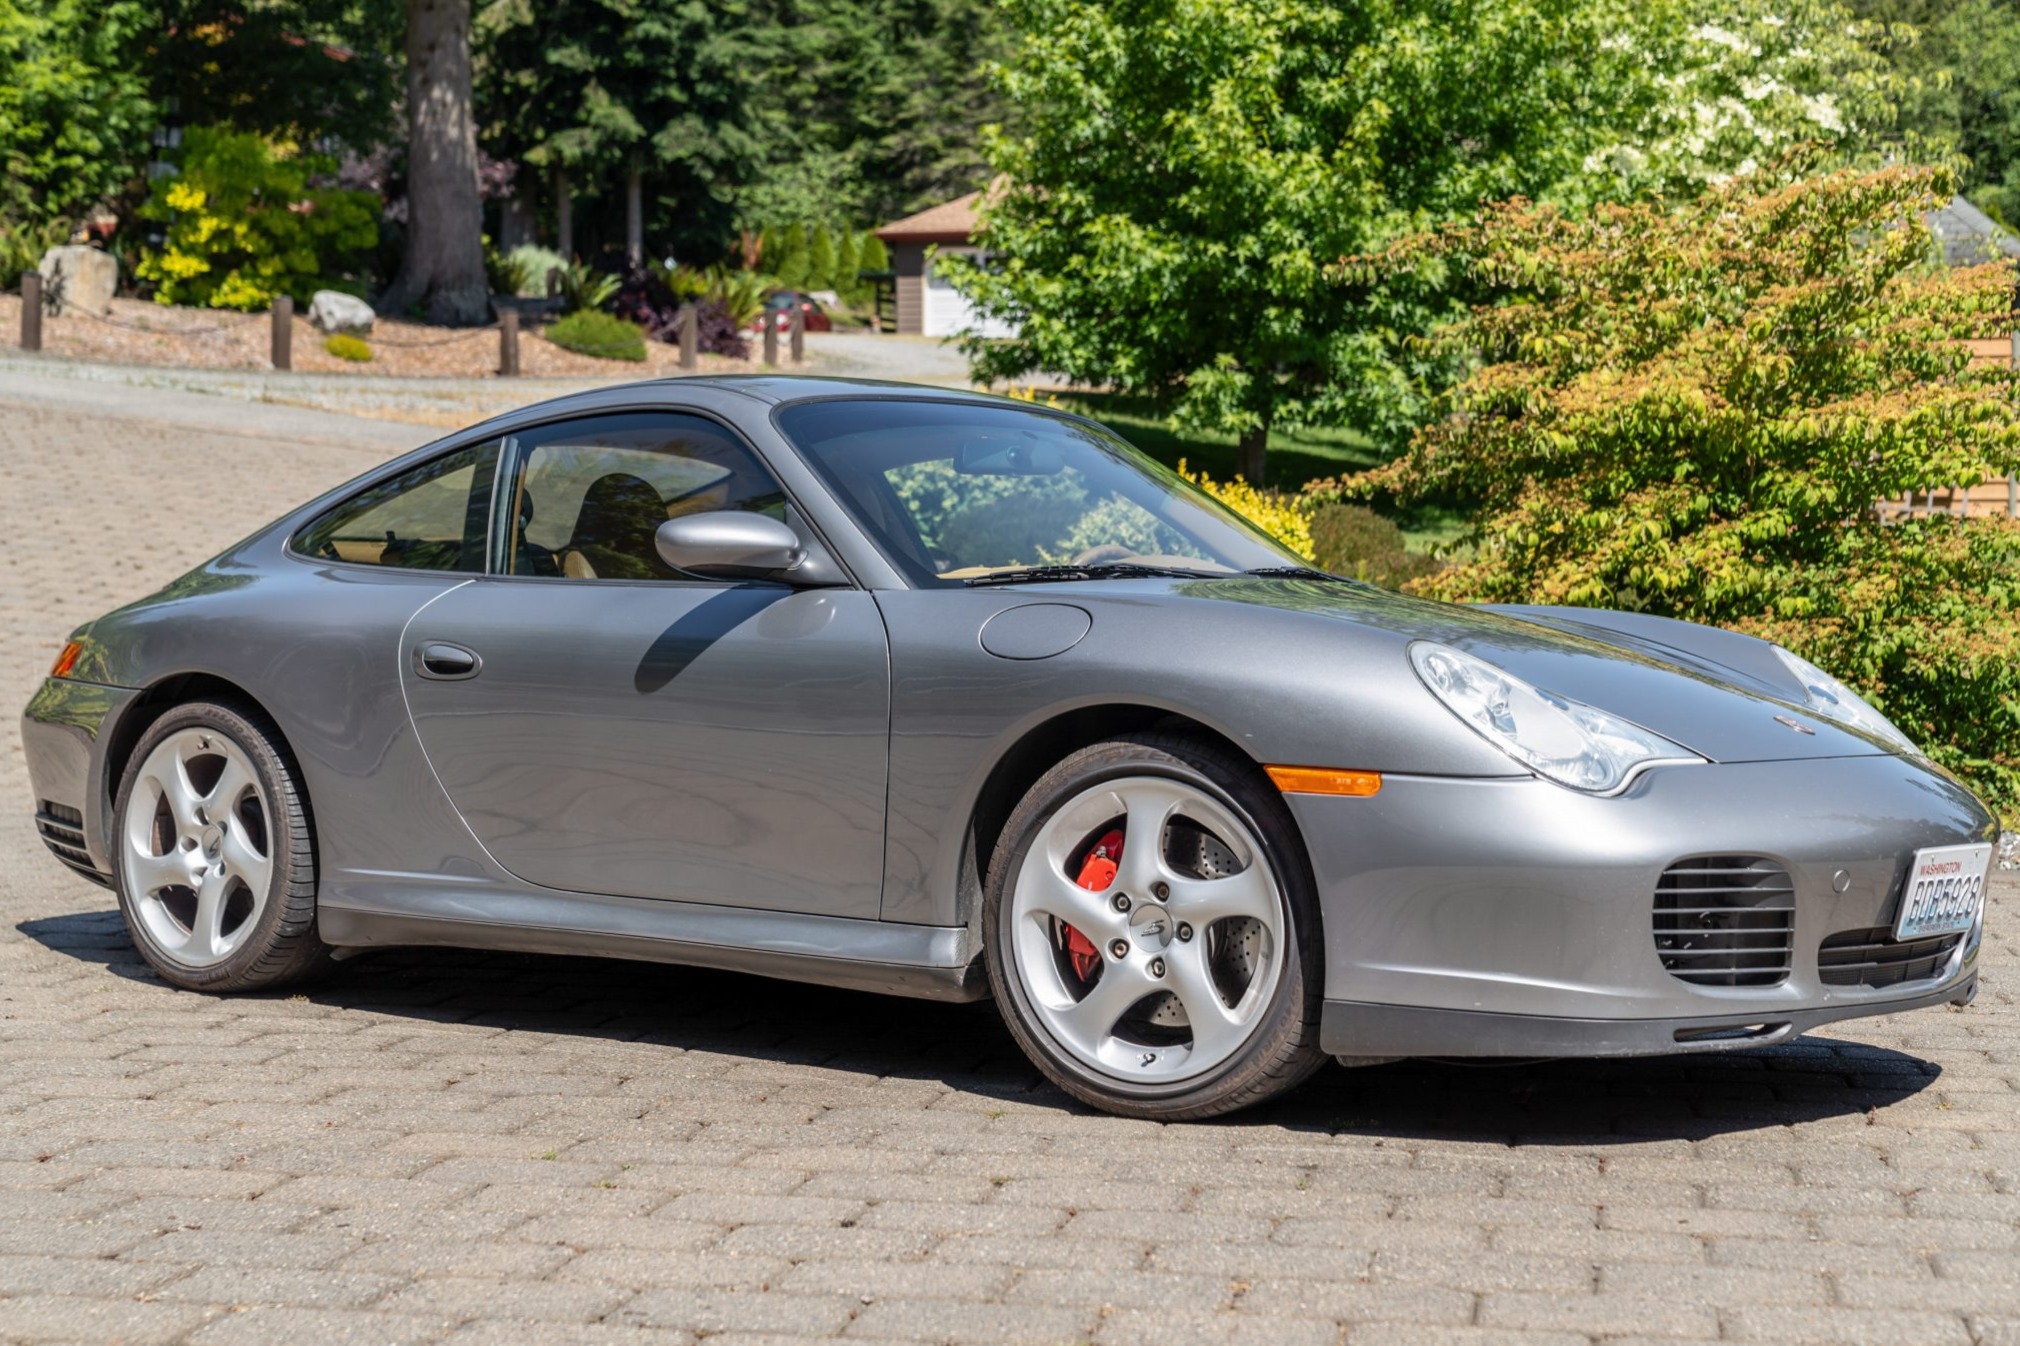 Used 2003 Porsche 911 Carrera 4S Coupe Review